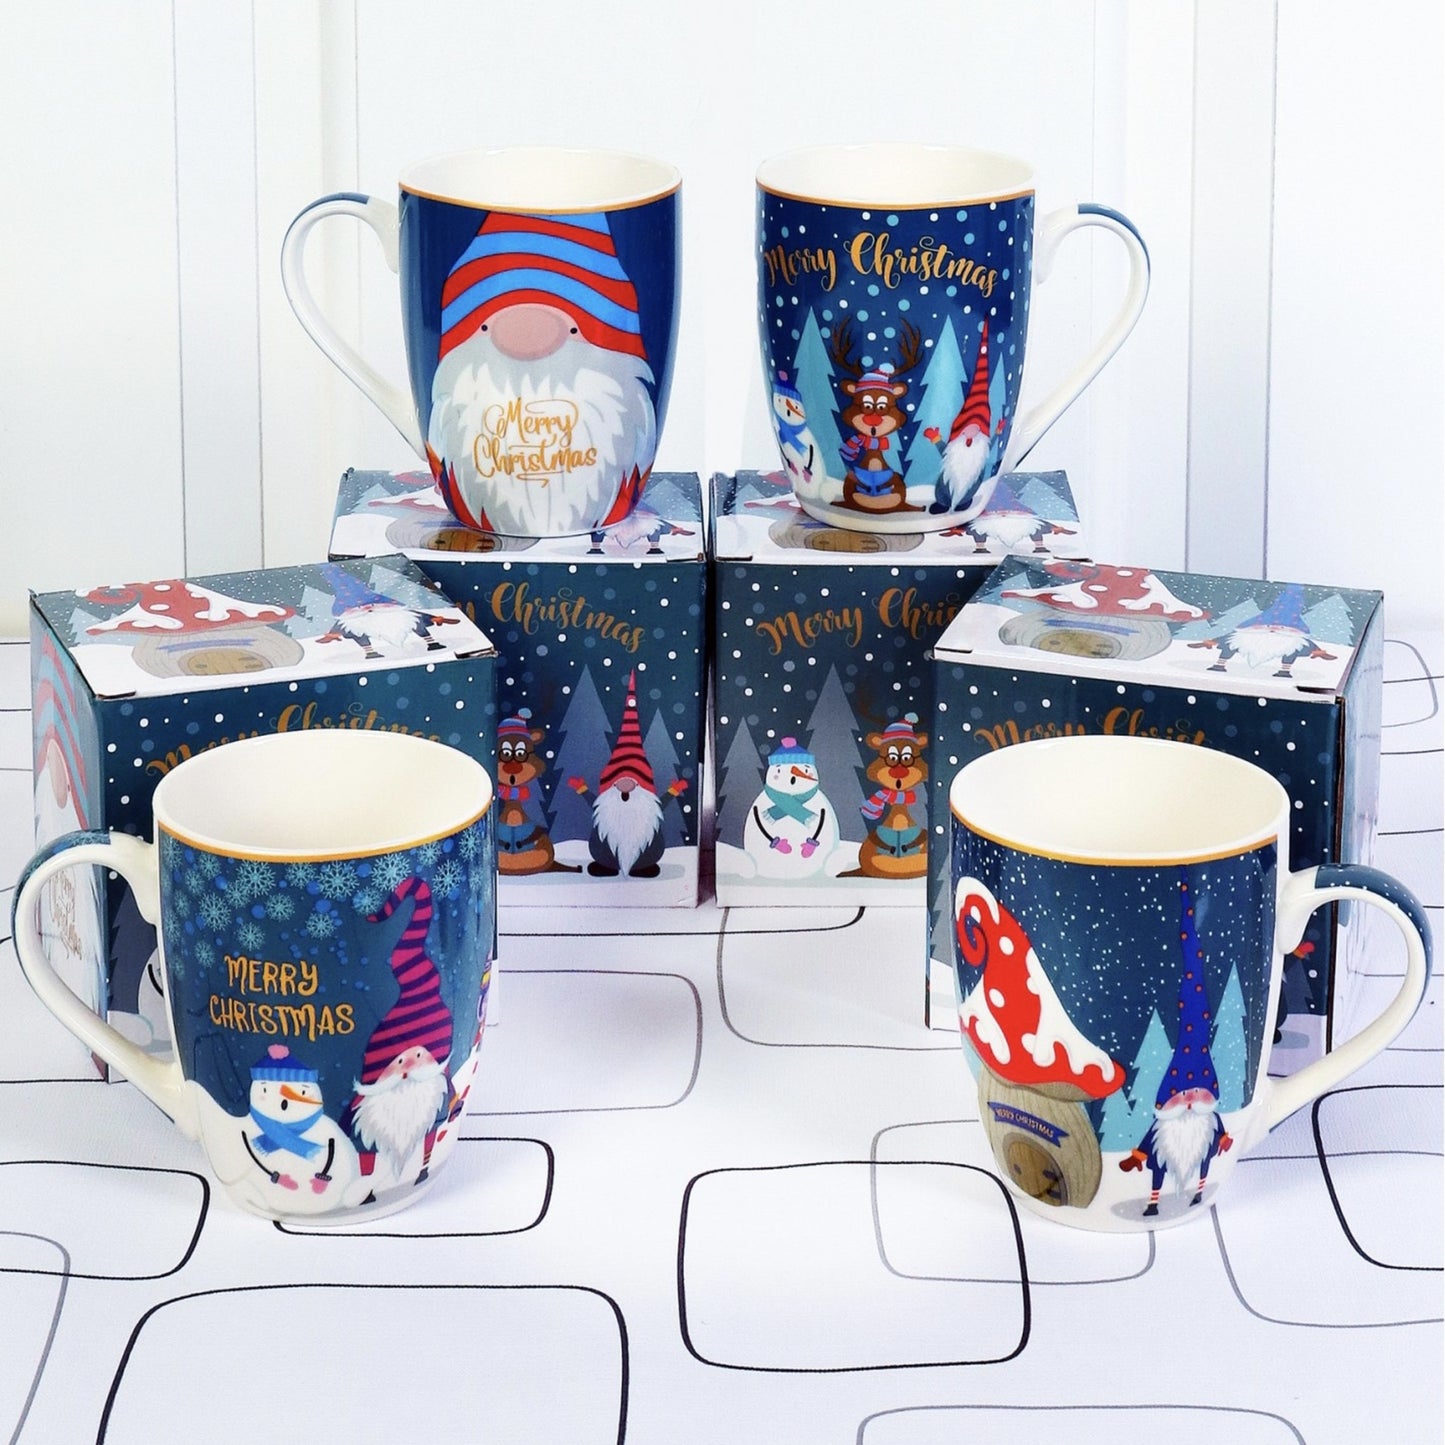 Set of 2 gift boxed Christmas mugs with assorted gnome images.